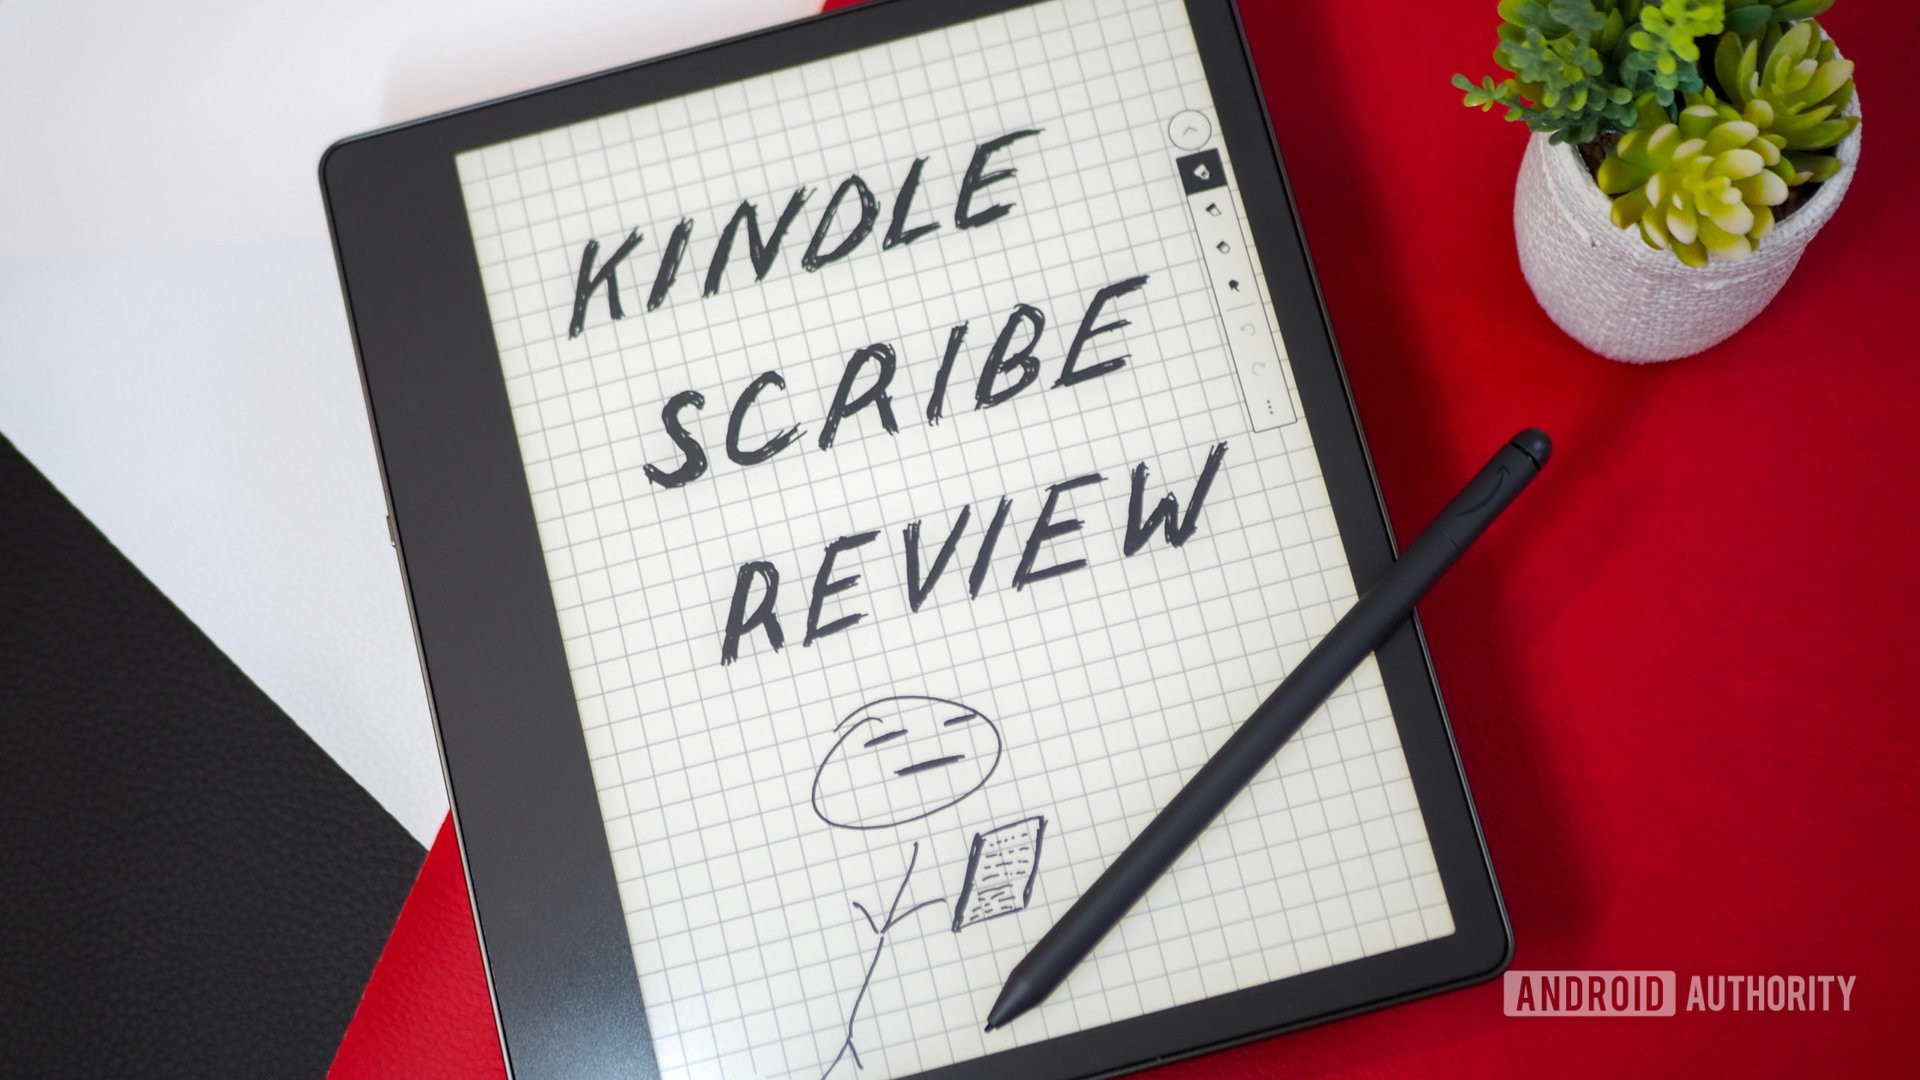 Amazon Kindle Scribe showing a sketch of "Kindle Scribe Review" and stickman holding an e-reader with the Premium Pen next to it